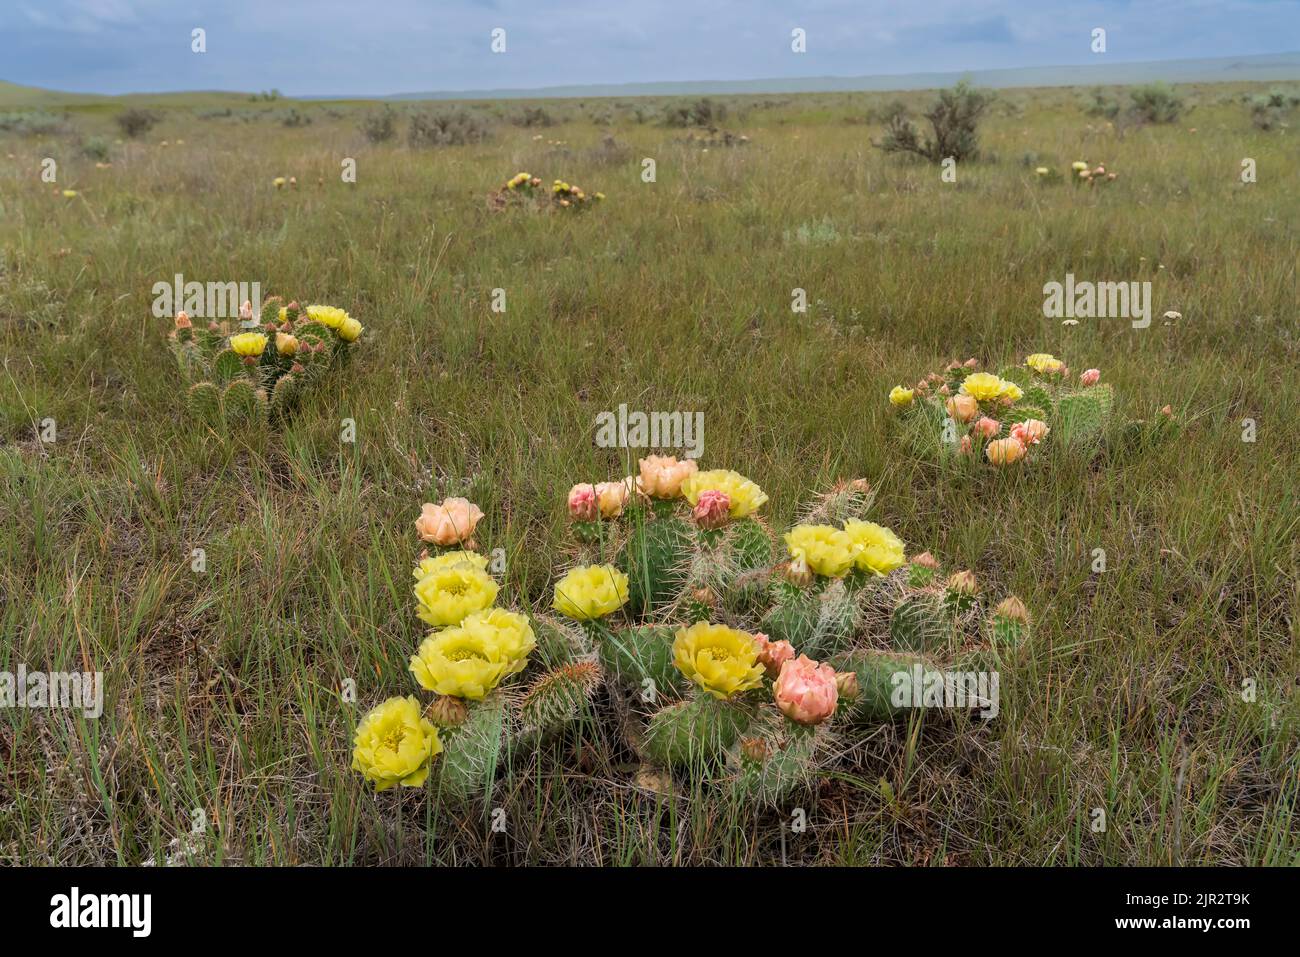 The prickly pear cactus blooming in Grasslands National Park in southern Saskatchewan, Canada. Stock Photo